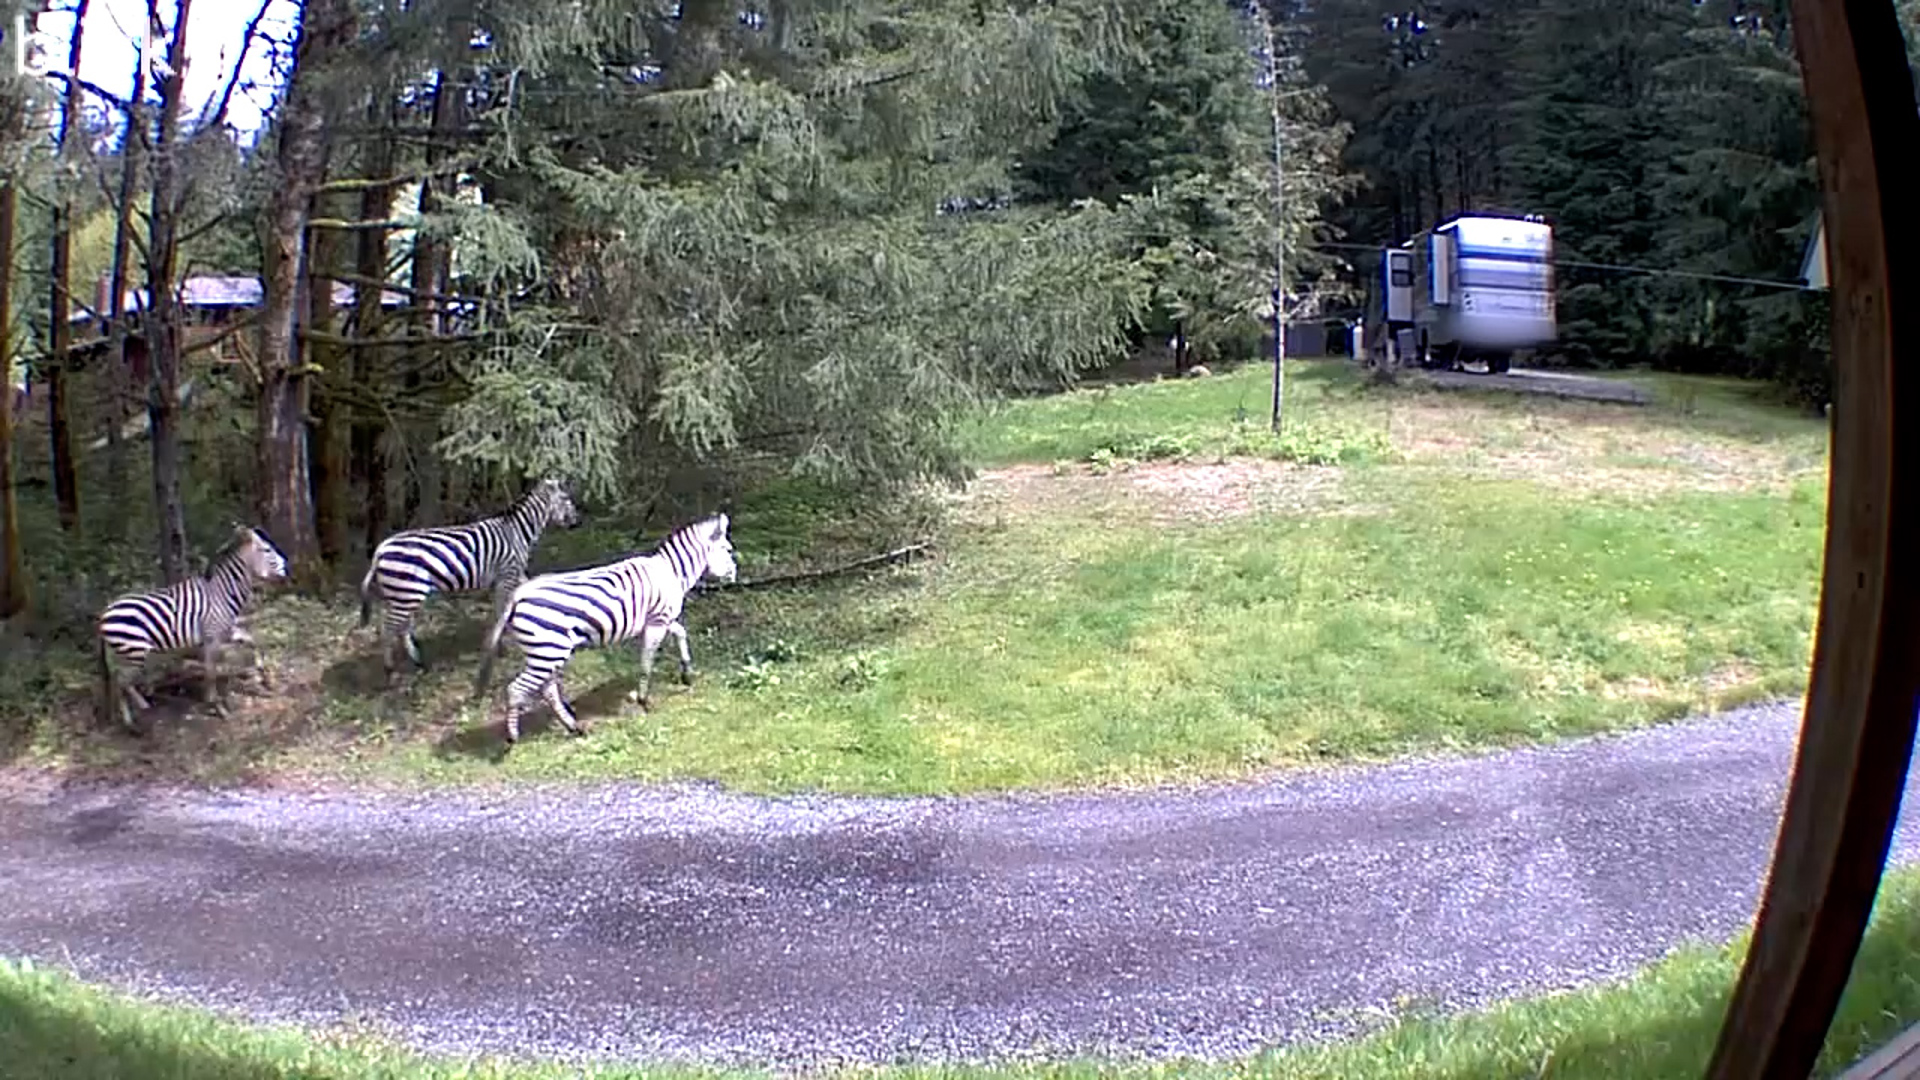 Residents living in North Bend, Washington came together to wrangle runaway zebras. One is said to still be missing after a driver stopped to secure a trailer.